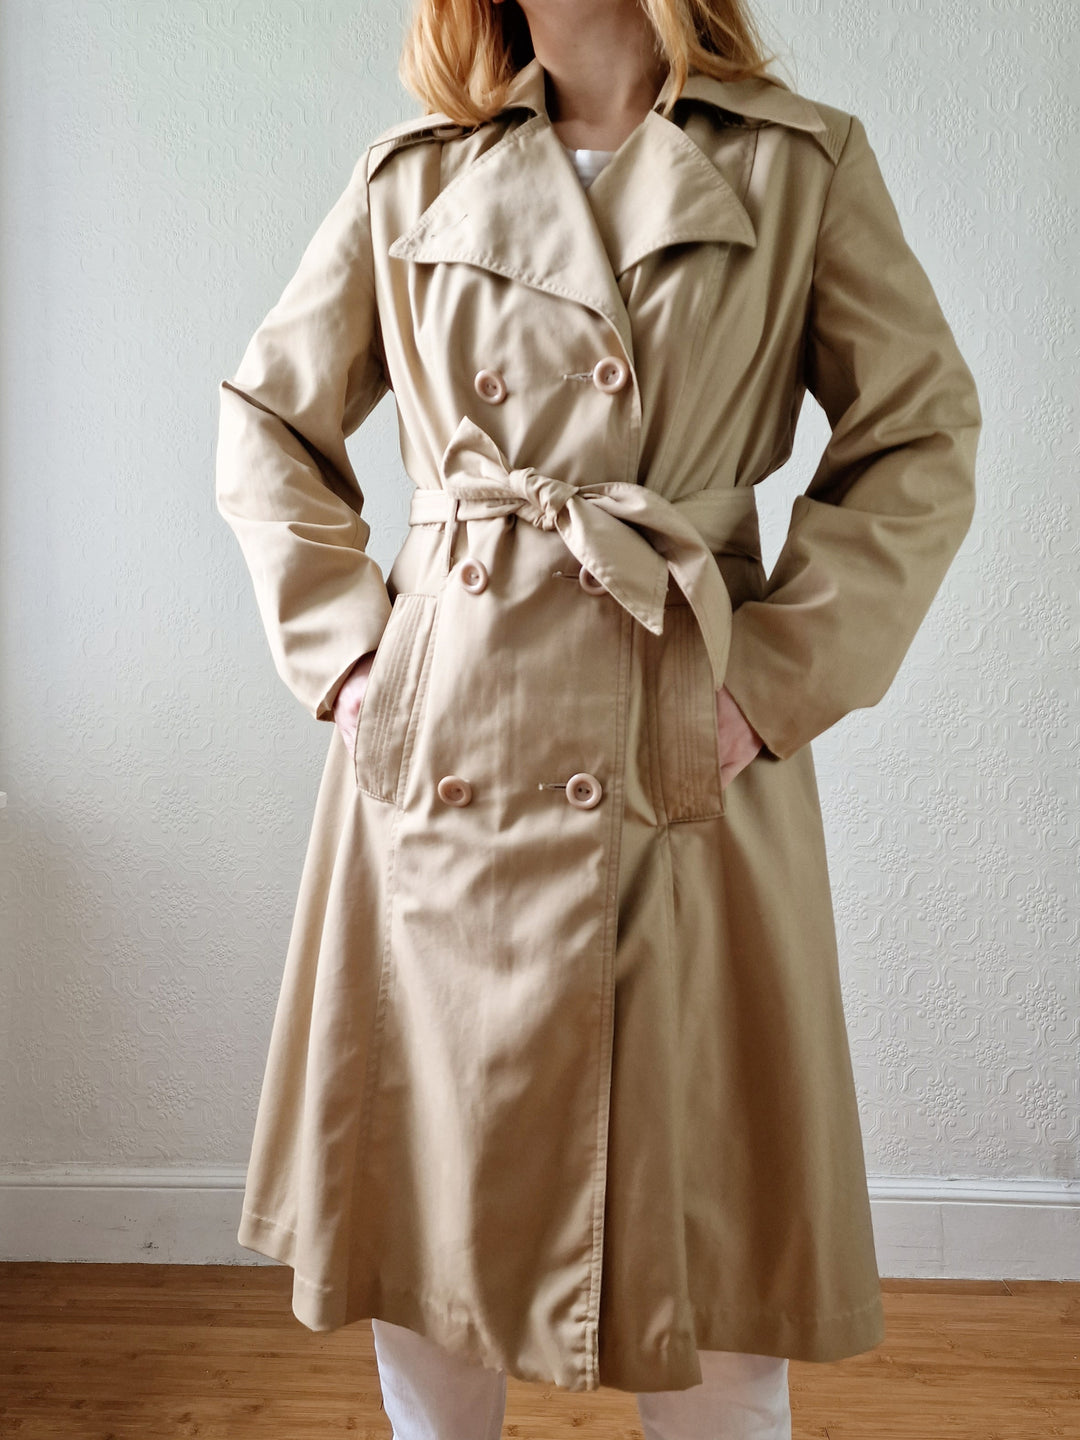 Vintage 70s Camel Double Breasted A-Line Trench Coat - S